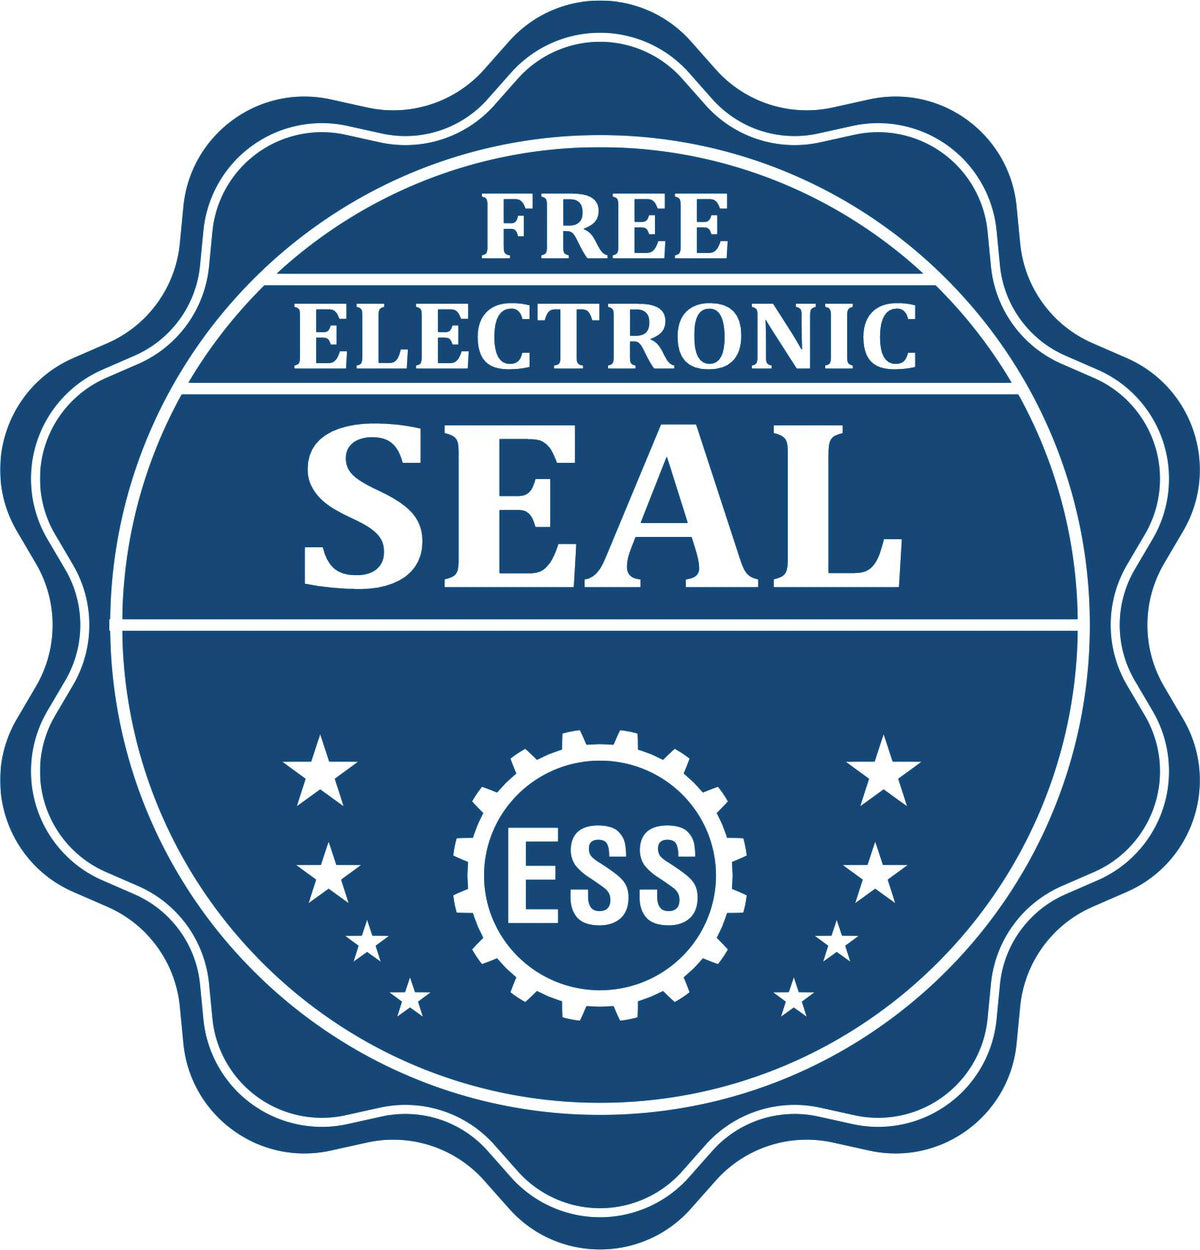 A badge showing a free electronic seal for the Slim Pre-Inked Oregon Professional Geologist Seal Stamp with stars and the ESS gear on the emblem.